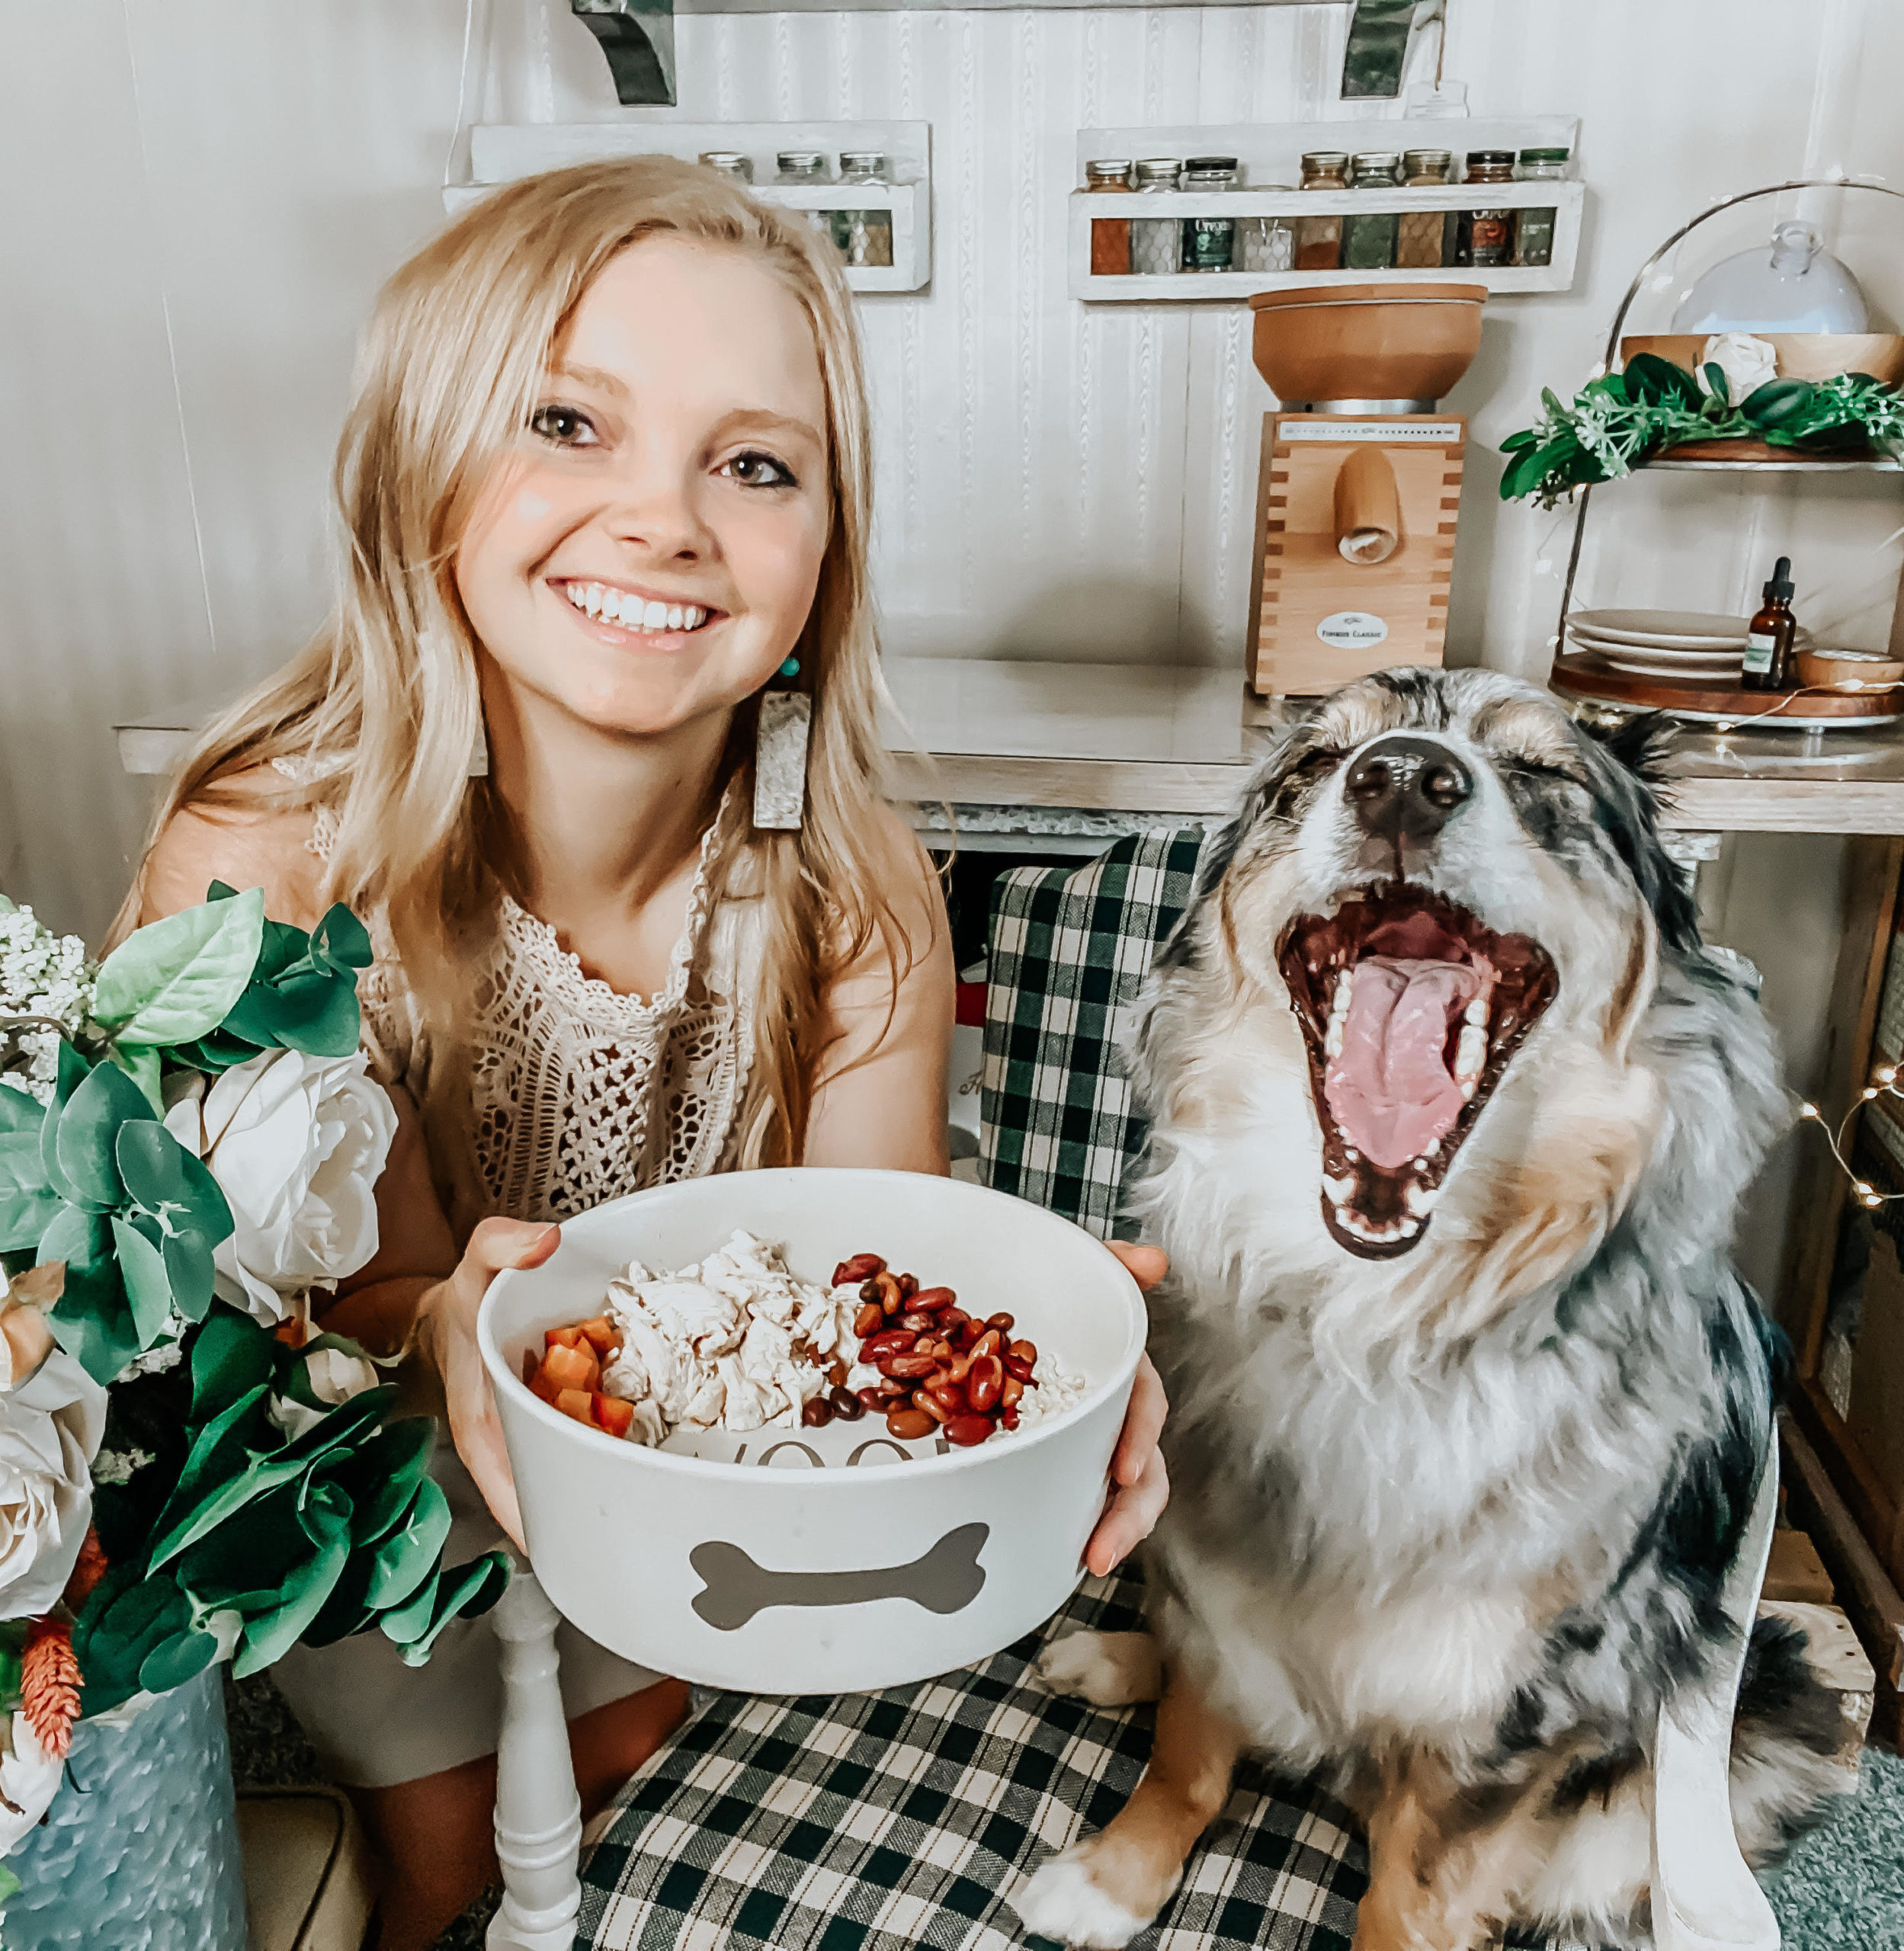 australian shepherd dog with mouth wide open like she is screaming with a blonde girl (kiersten zile) holding a bowl of homemade dog food